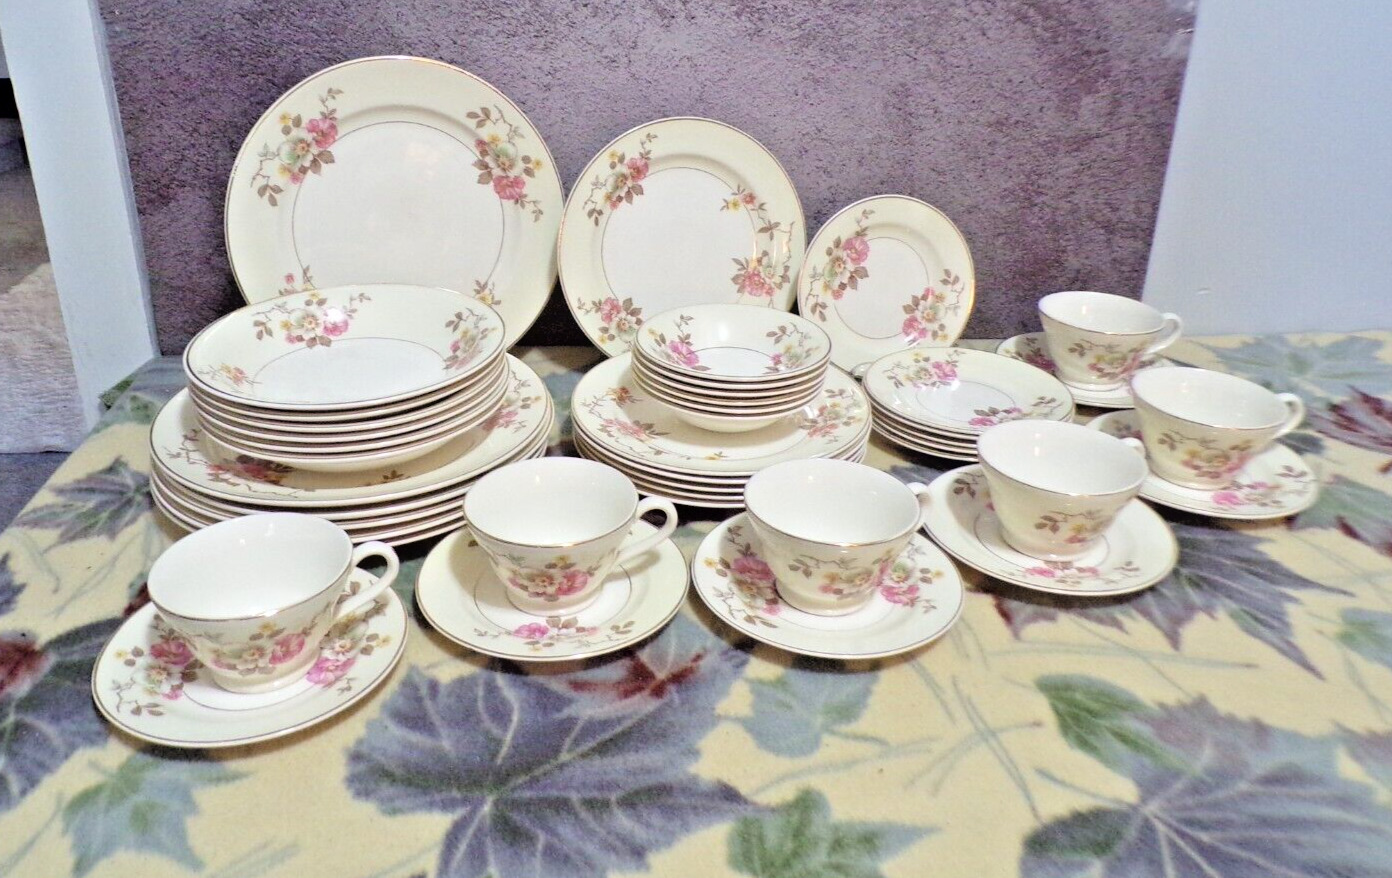 Knowles Edwin China Vintage 49-3 Mayday R-2131-UG Service for 6 42 Pieces